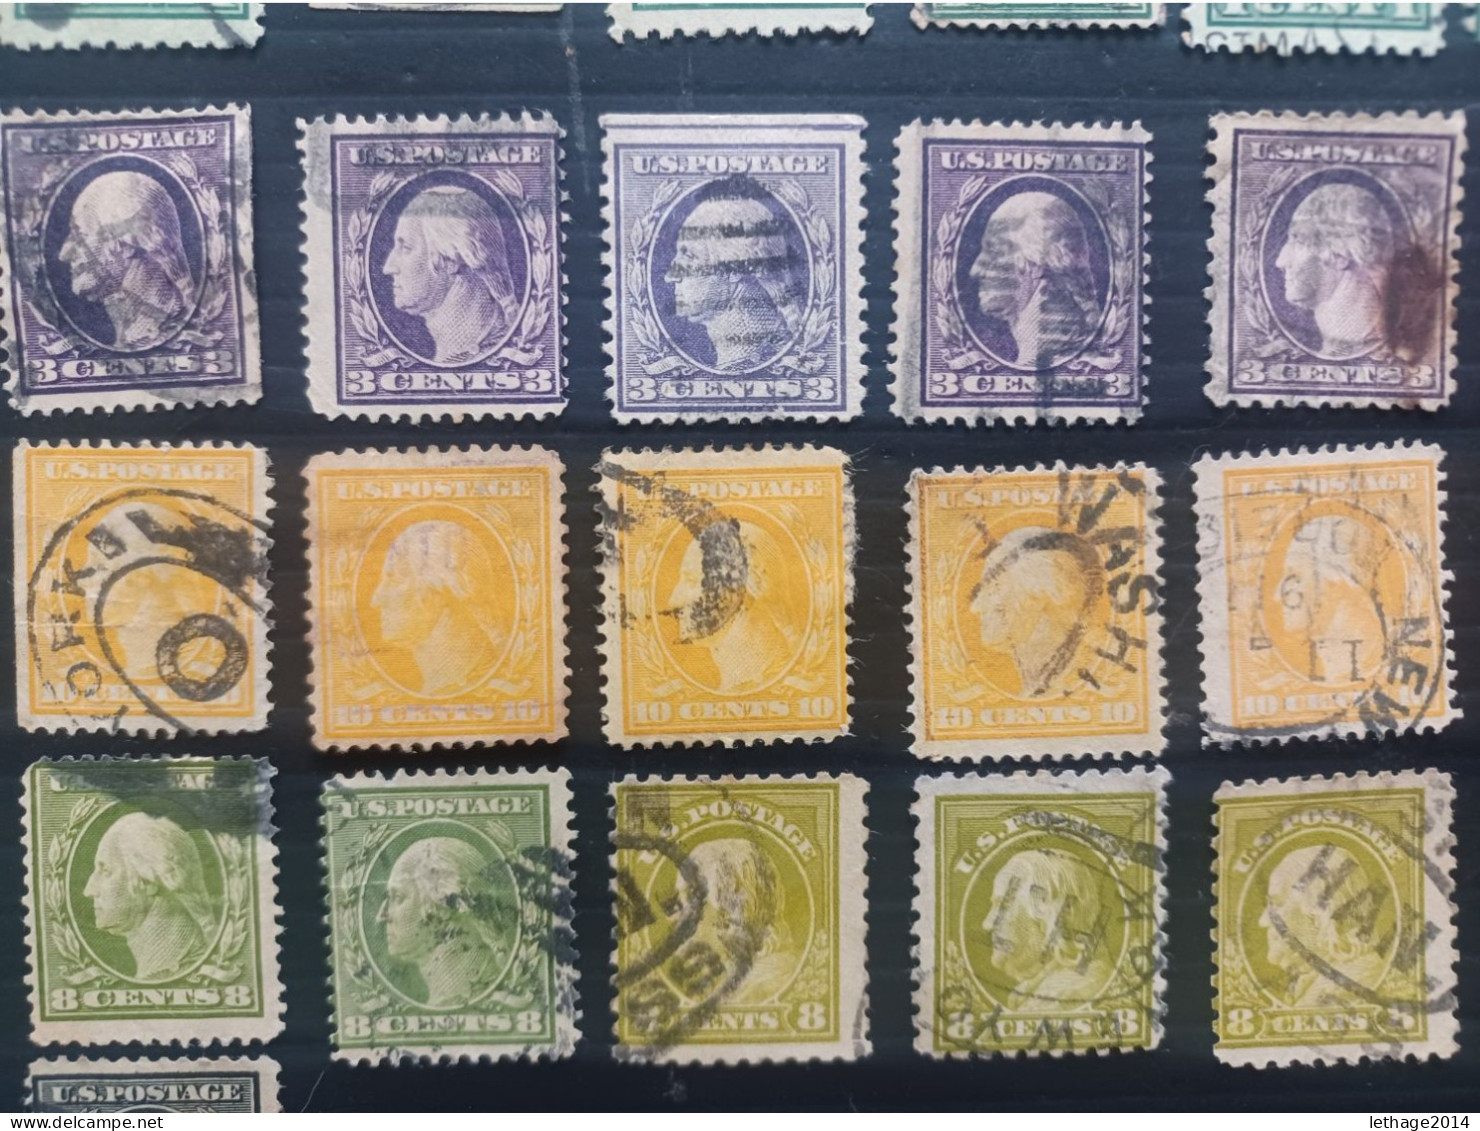 UNITED STATE 1893 COLUMBIAN EXPOSITION MNHL + BIG STOCK LOT MIX 85 SCANNERS PERFIN TAX WASHINGTON STAMPS MNH FRAGMANT